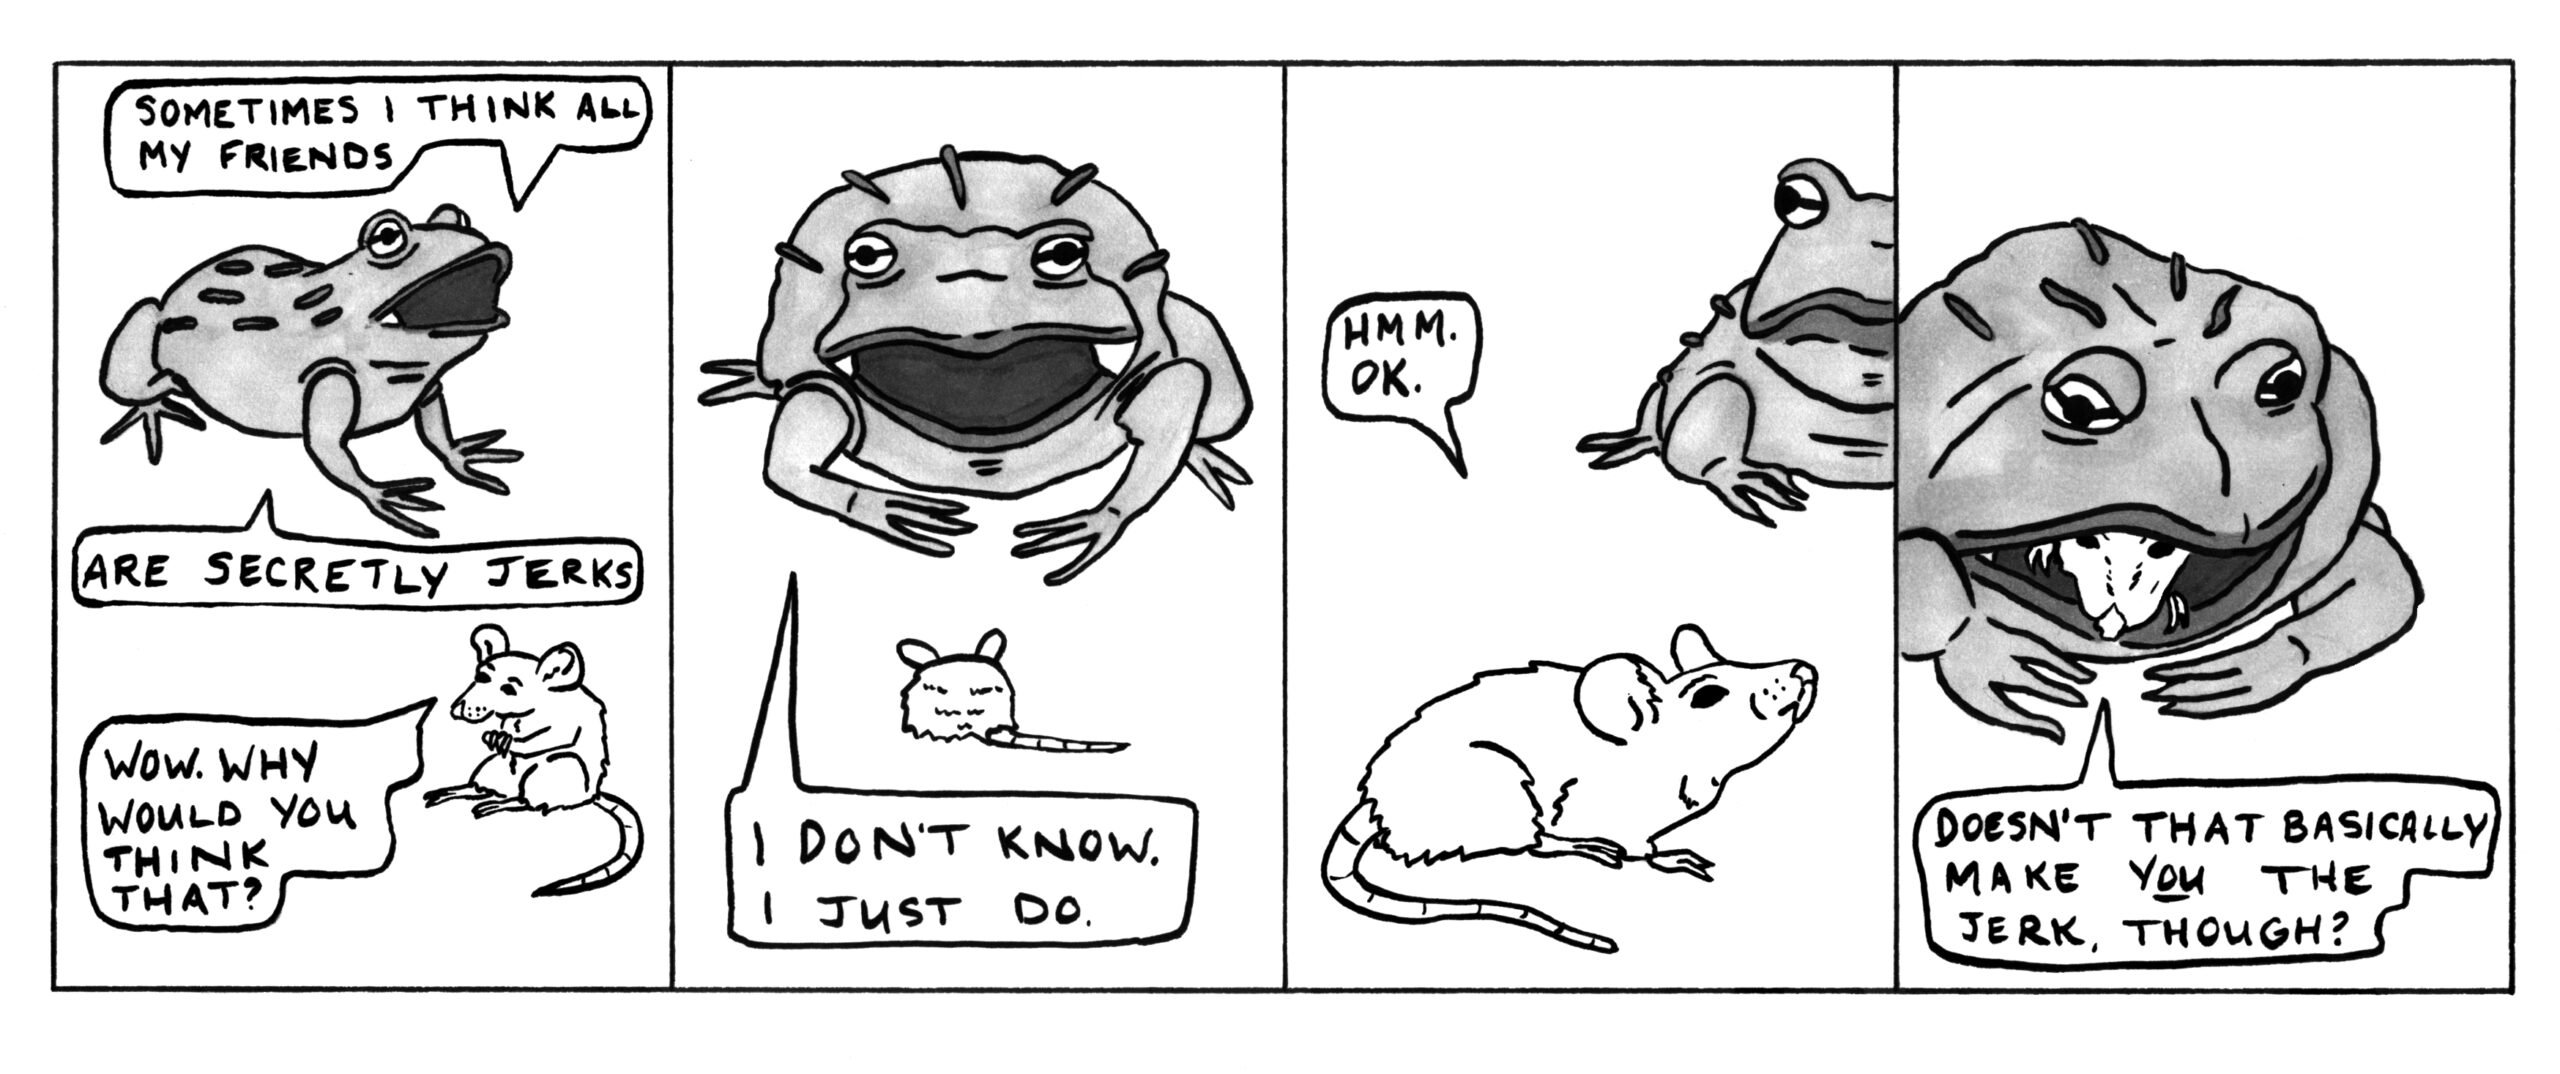 Probably a good time to emphasize the author/comic frog divide